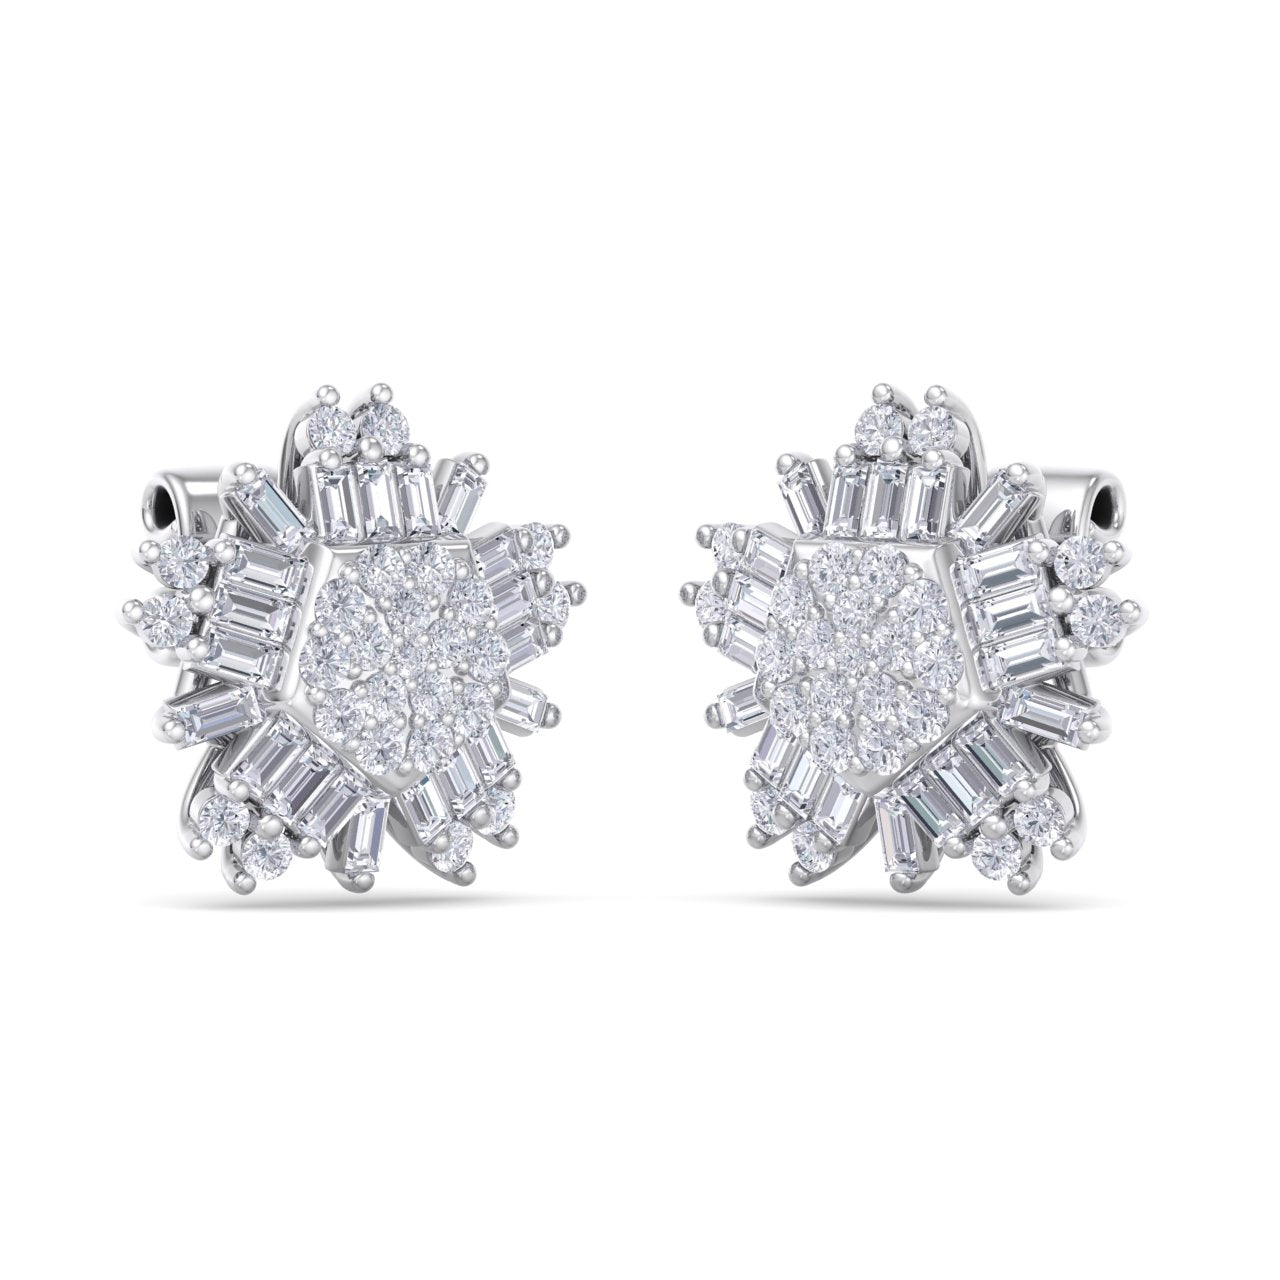 Snowflake earrings in white gold with white diamonds of 0.83 ct in weight